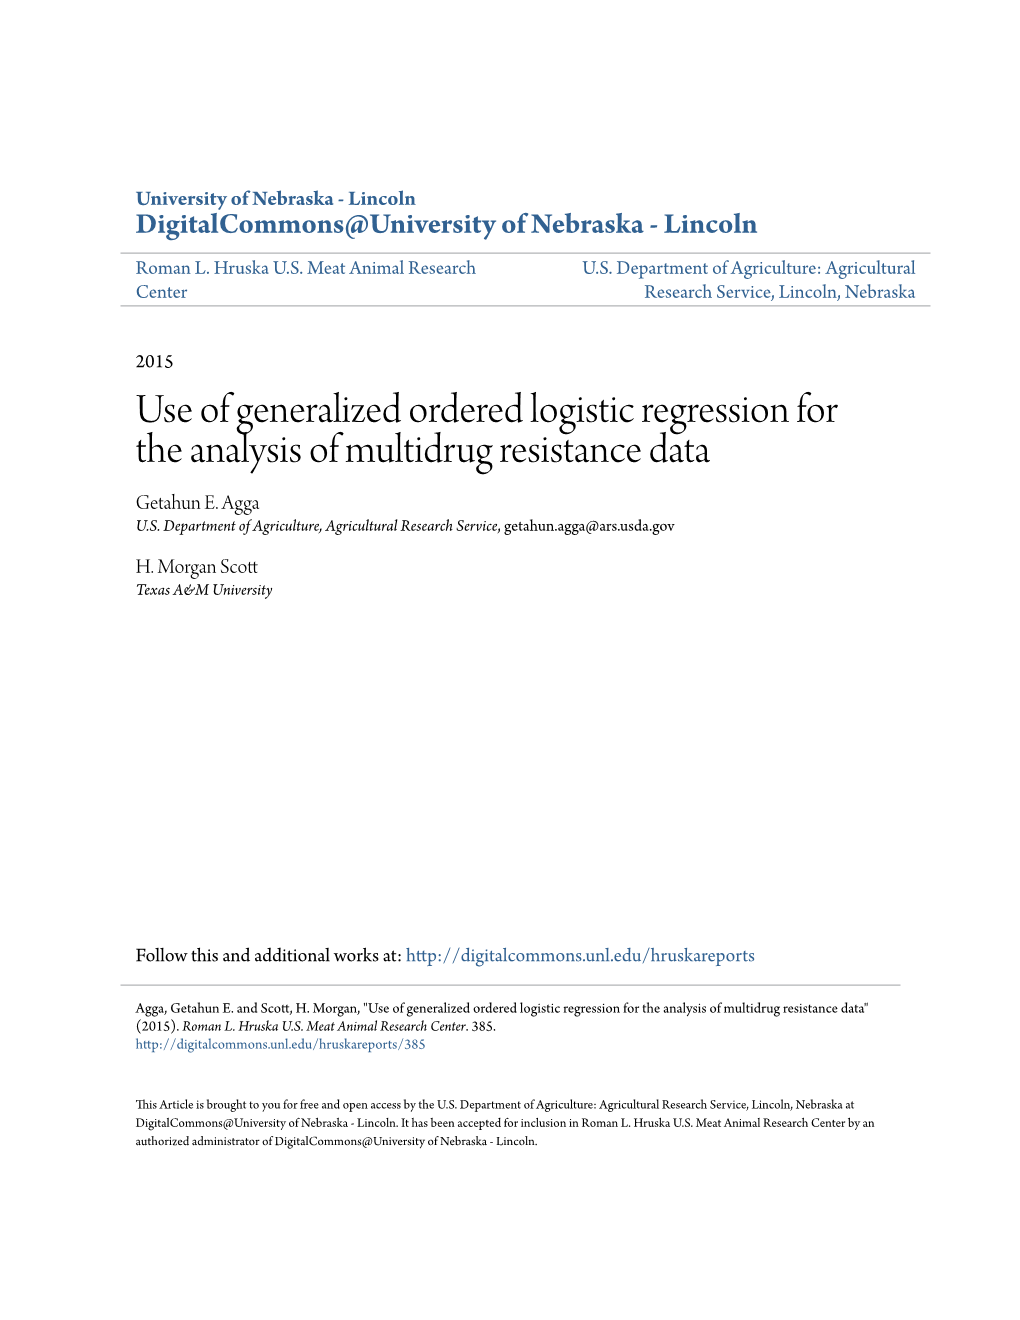 Use of Generalized Ordered Logistic Regression for the Analysis of Multidrug Resistance Data Getahun E